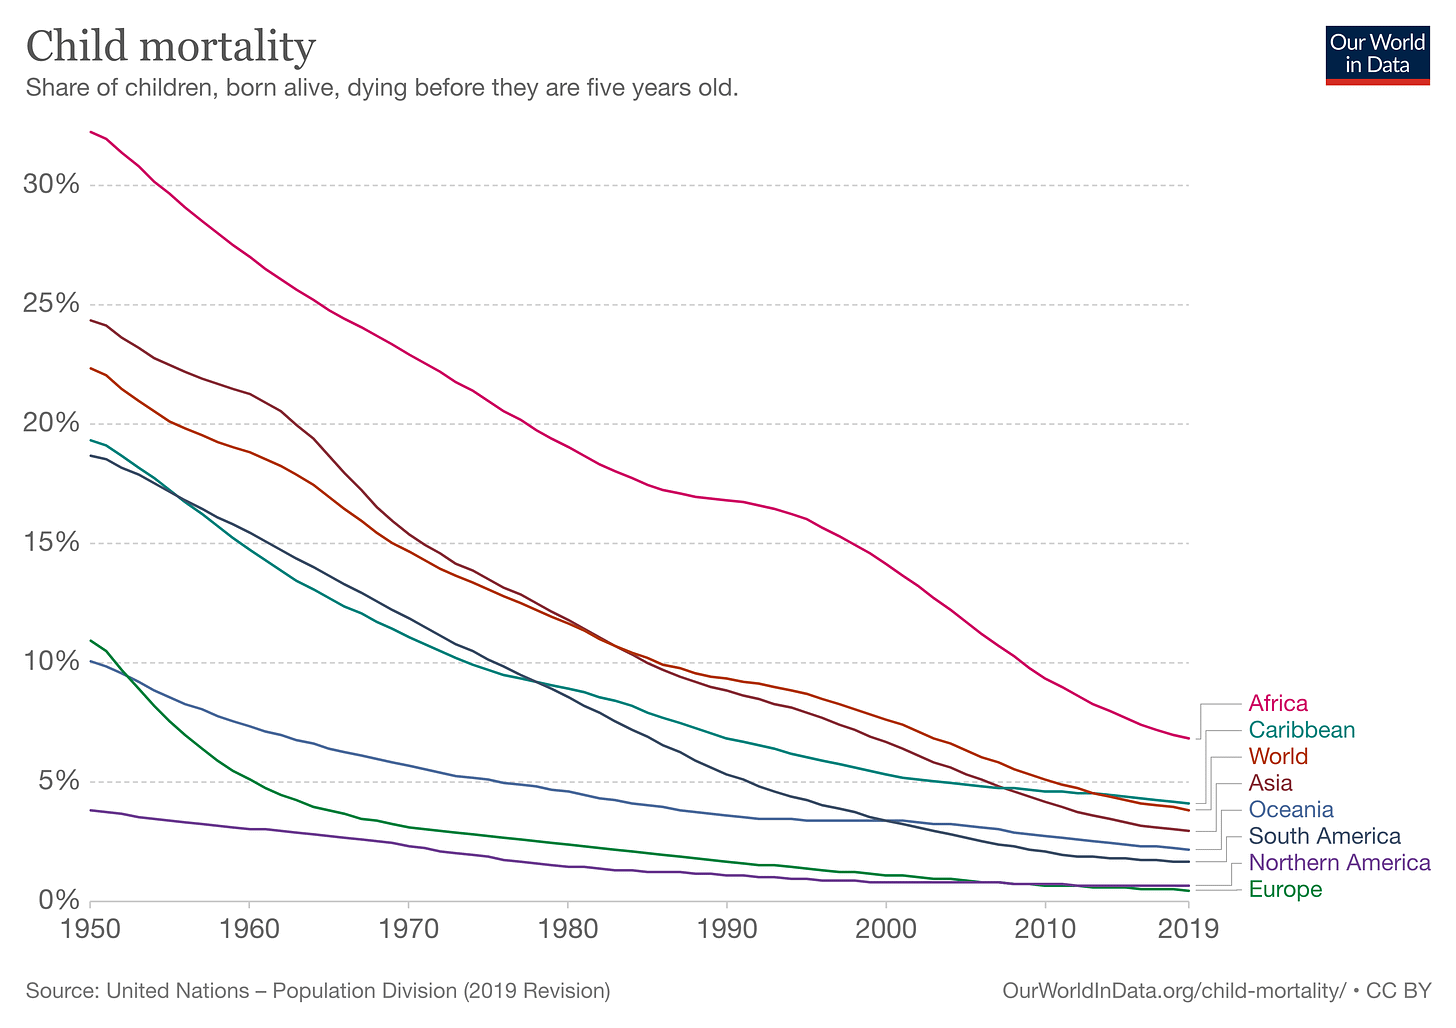 Our World in Data graph of the decline of child mortality from 1950 to 2019, going steadily down